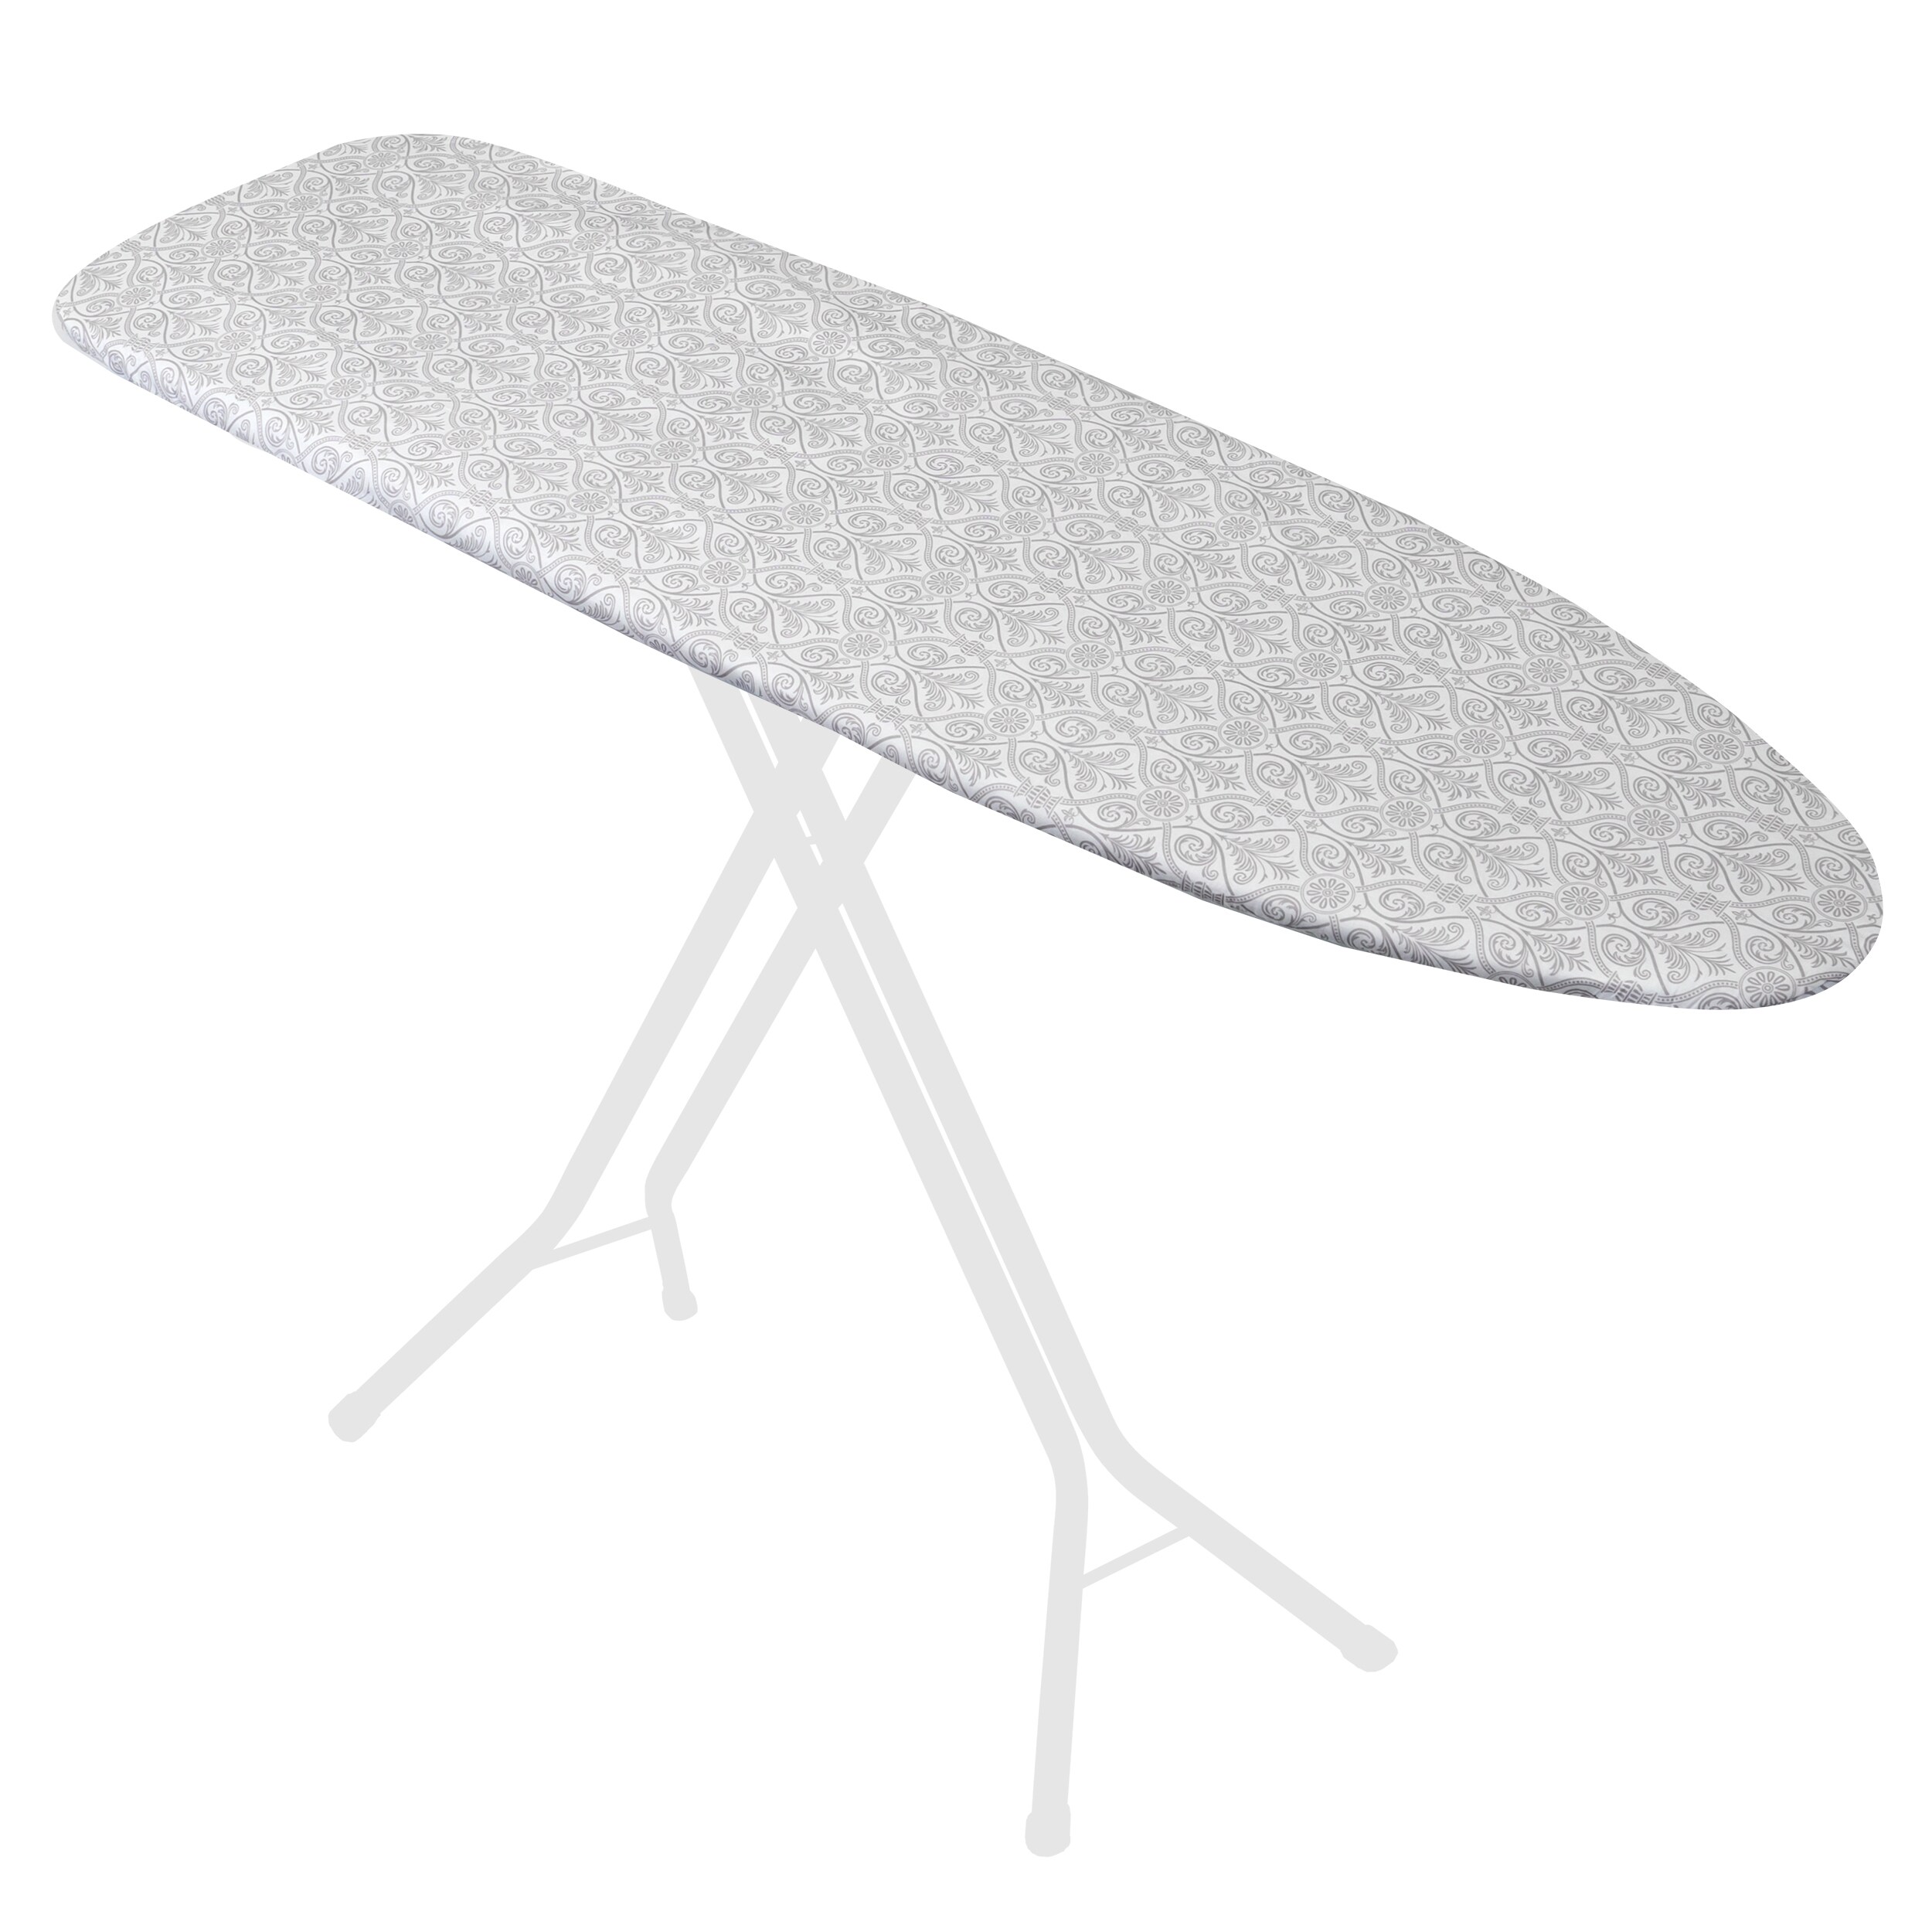 Household Essentials Basic Sleeve Mini Ironing Board Natural Cover and White Finish 4.5 x 20 Ironing Surface 